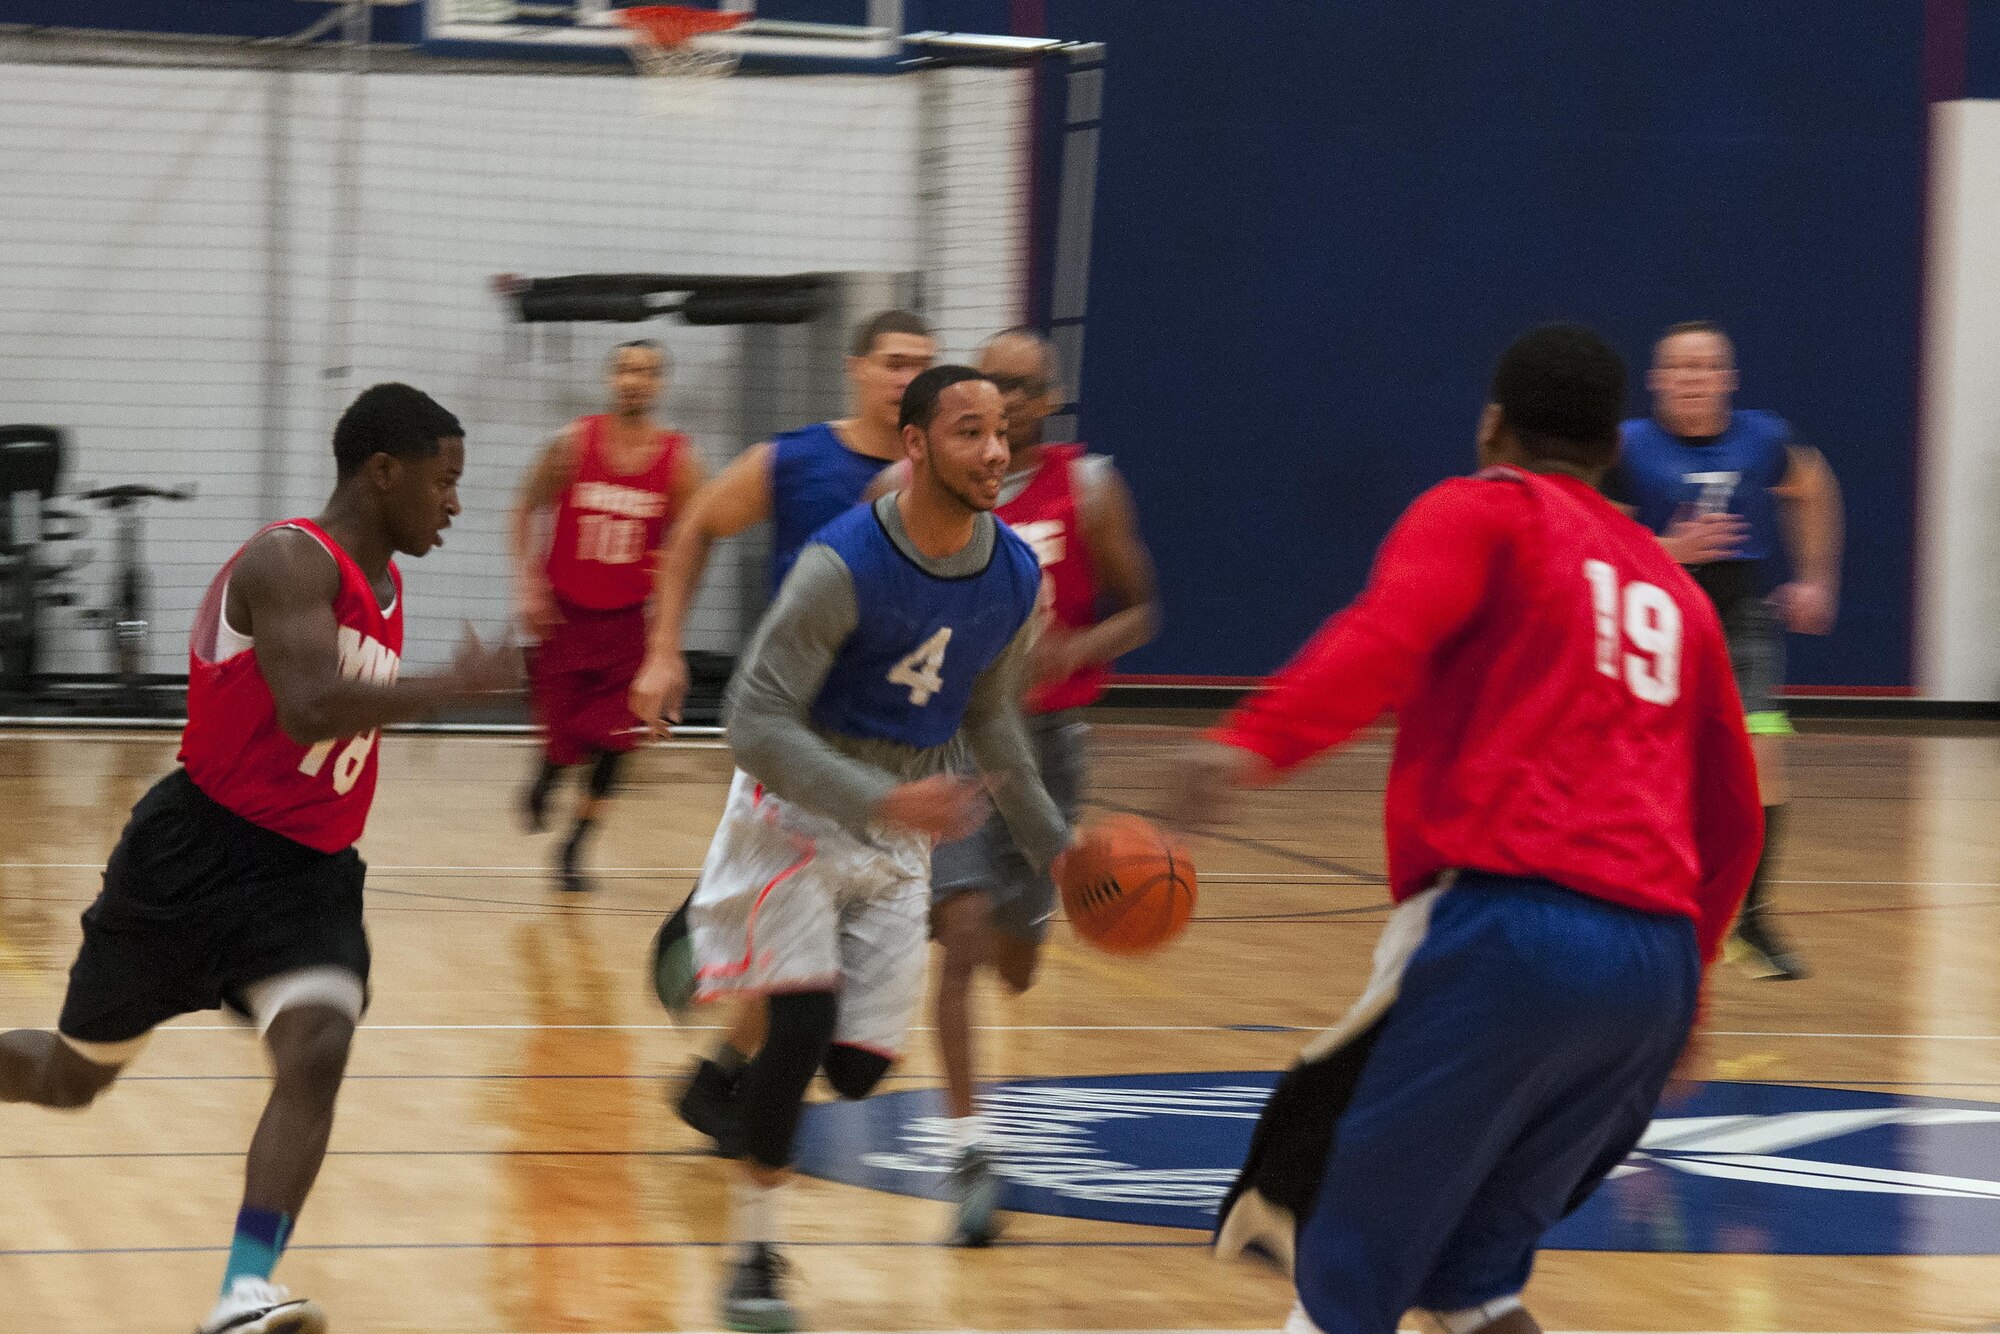 Anthony McBride, 90th Force Support Squadron, drives the ball down the court past 90th Maintenance Group defenders to make a layup during an intramural basketball game Jan. 26, 2016, on F.E. Warren Air Force Base, Wyo. The much-anticipated match-up brought two undefeated teams together, but FSS clenched the victory. (U.S. Air Force photo by Senior Airman Jason Wiese)